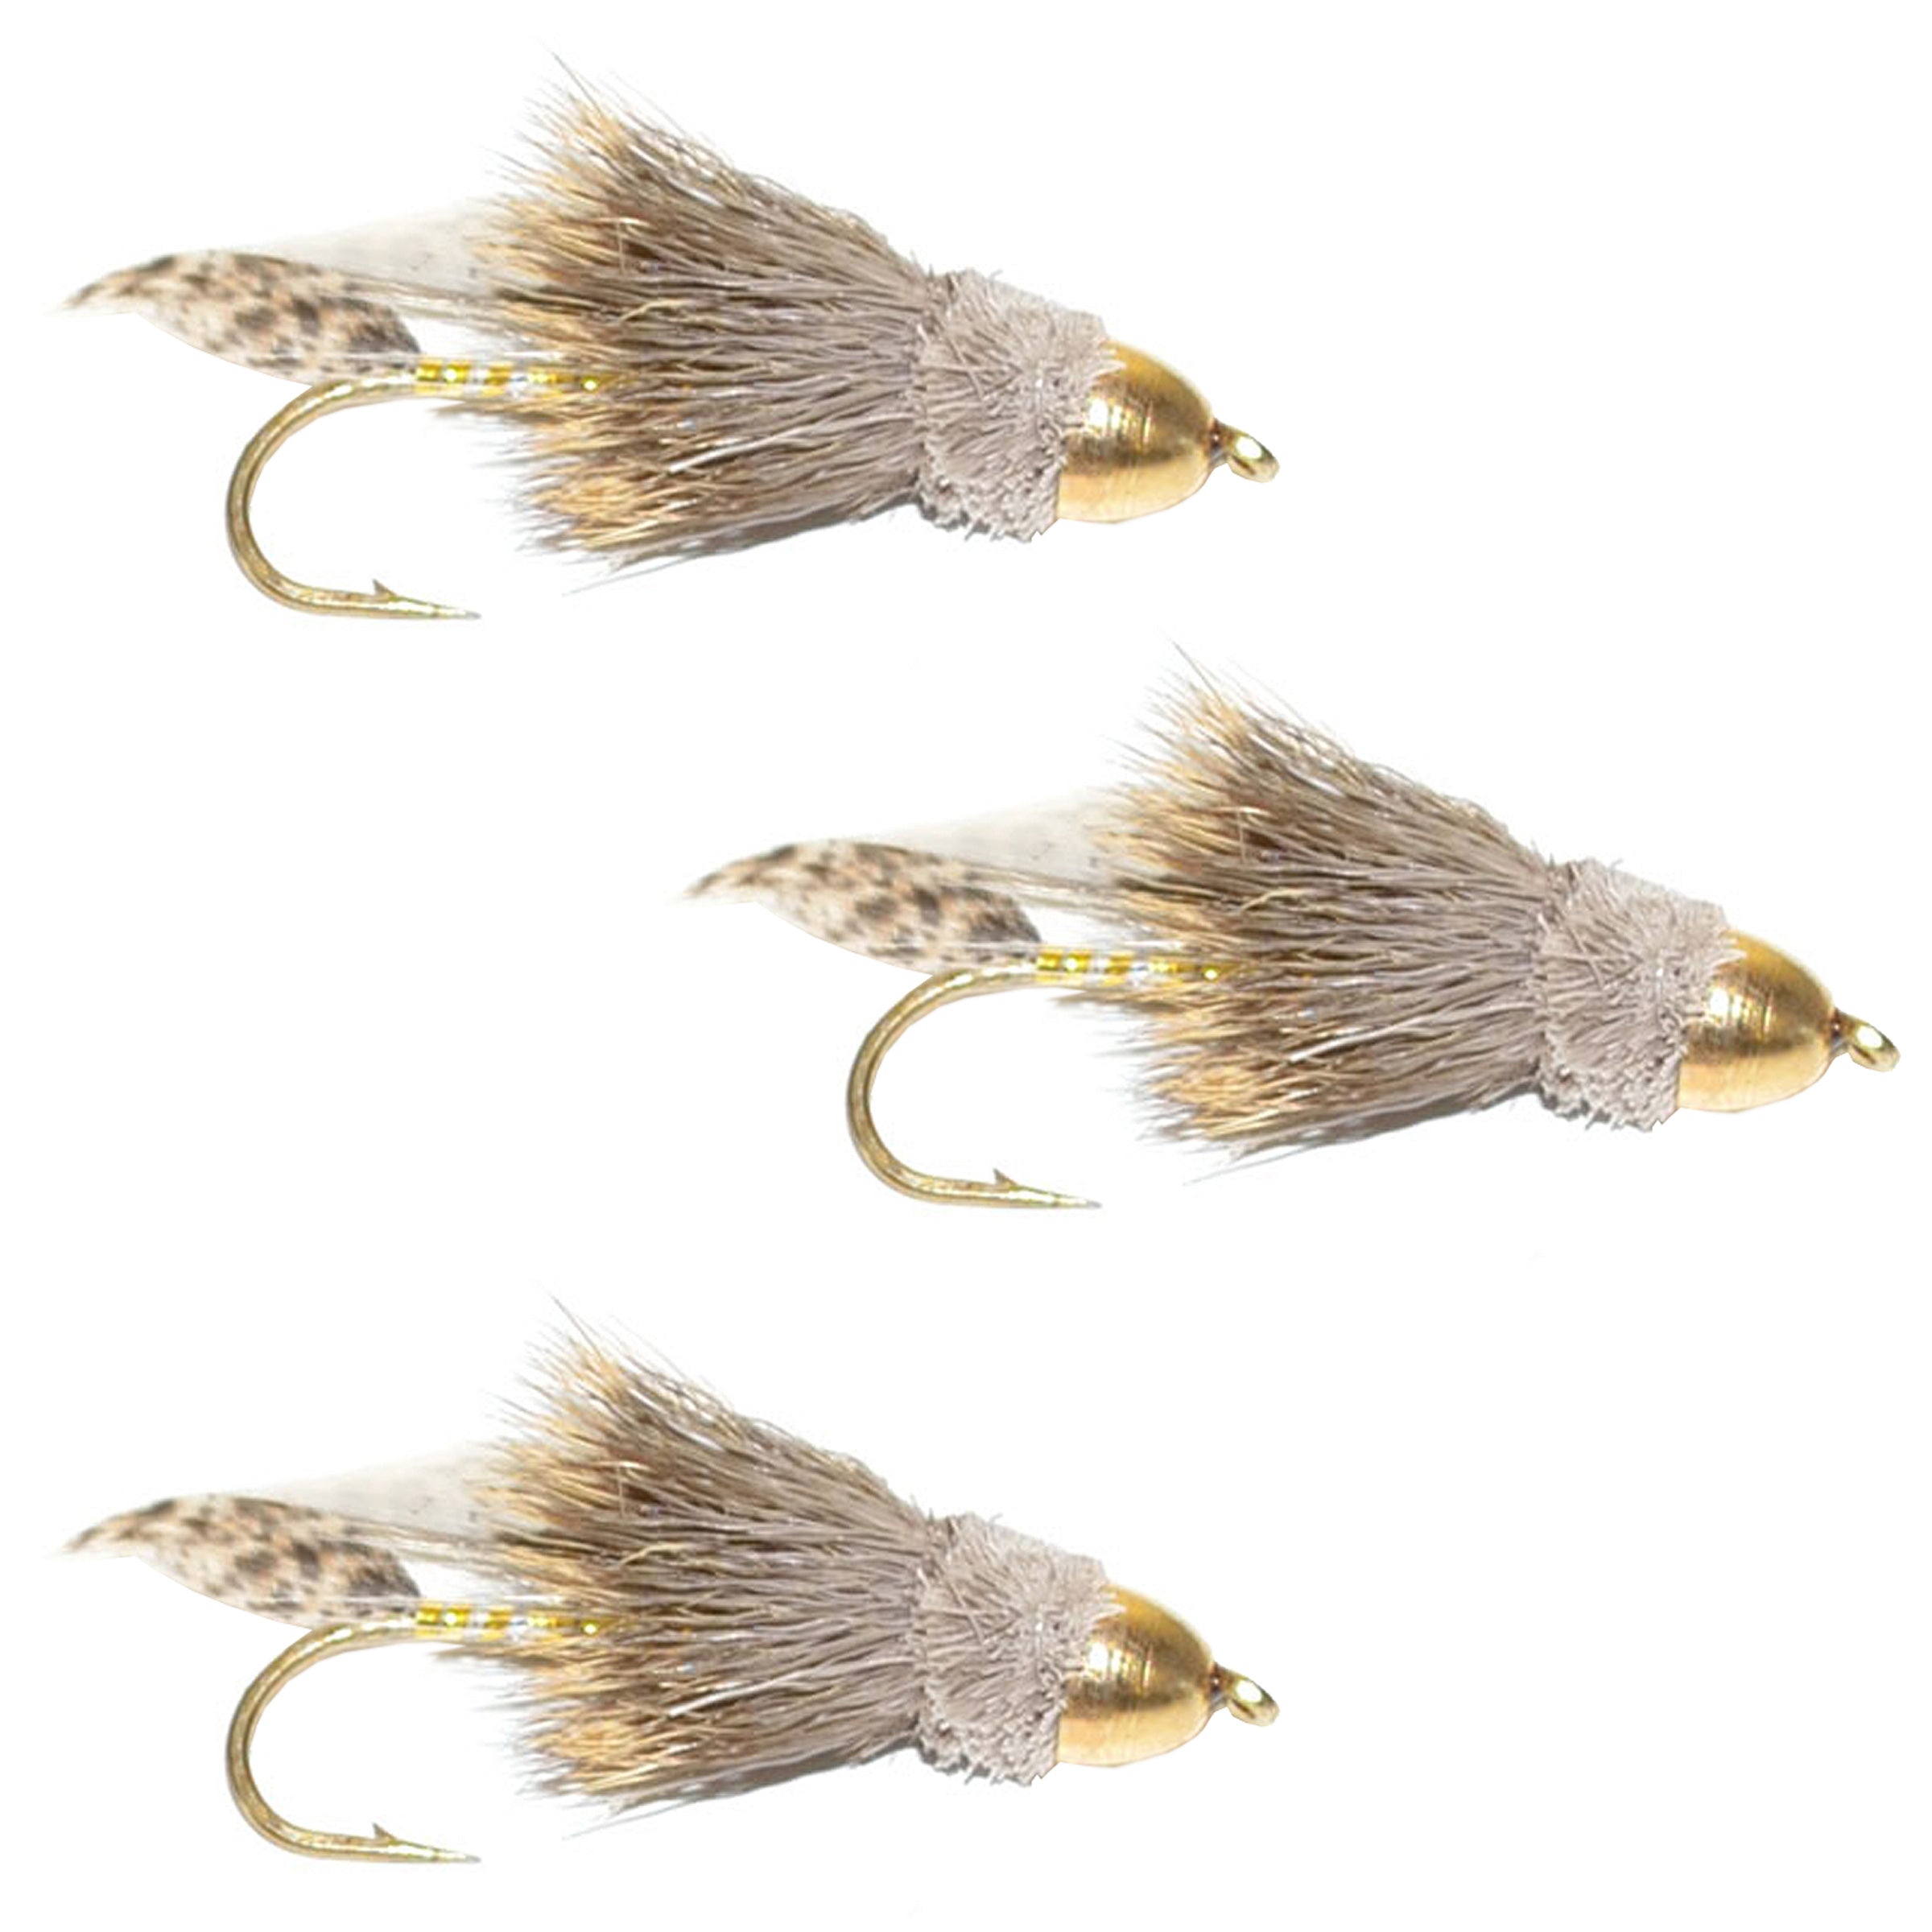 3 Pack Cone Head Muddler Minnow Trout and Bass Streamer Fly - Hook Size 8